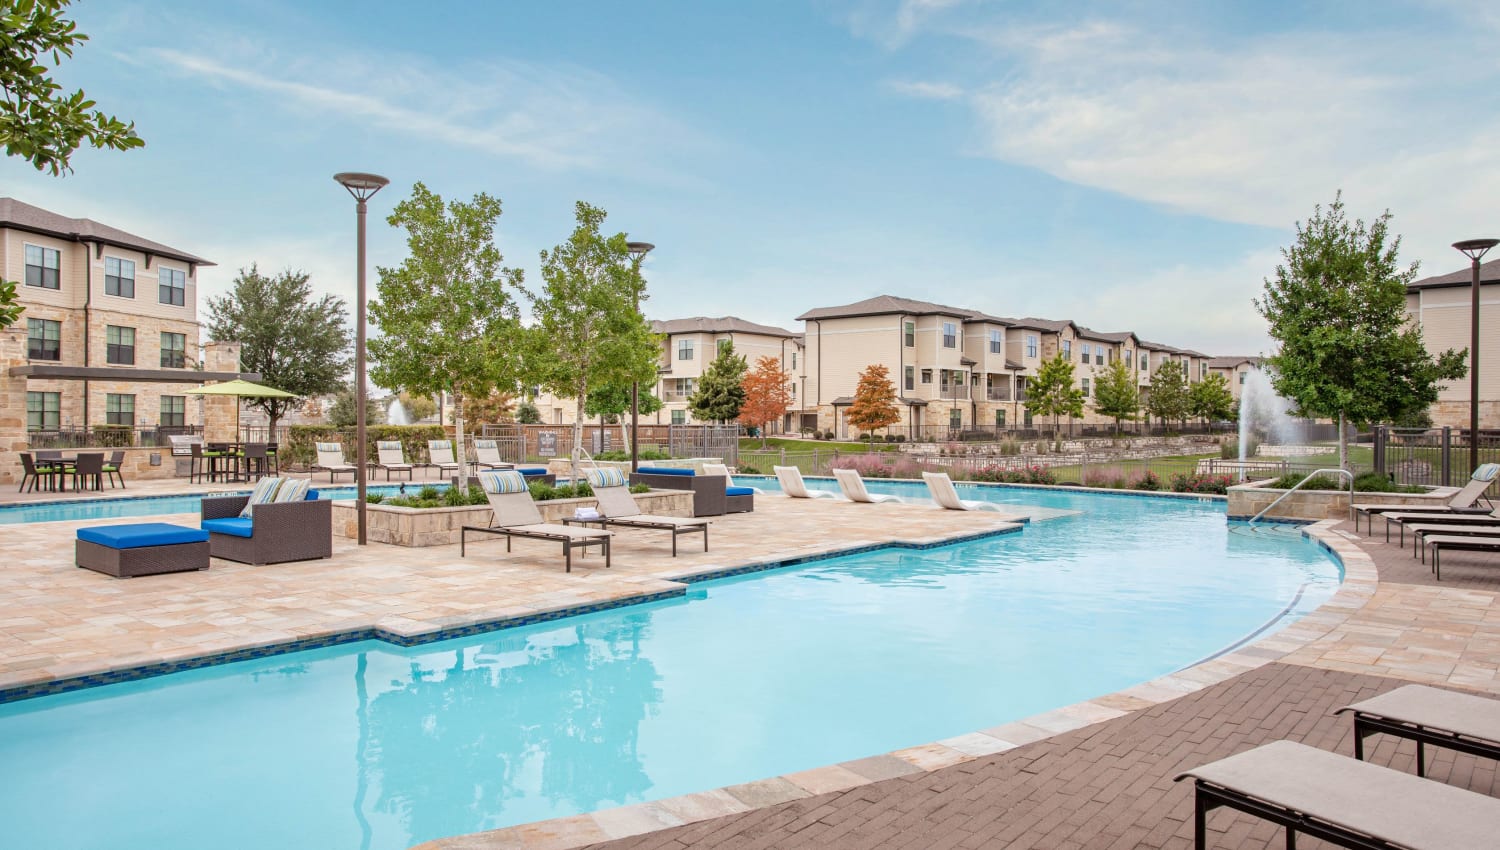 Large outdoor pool on a sunny day at Olympus Falcon Landing in Katy, Texas